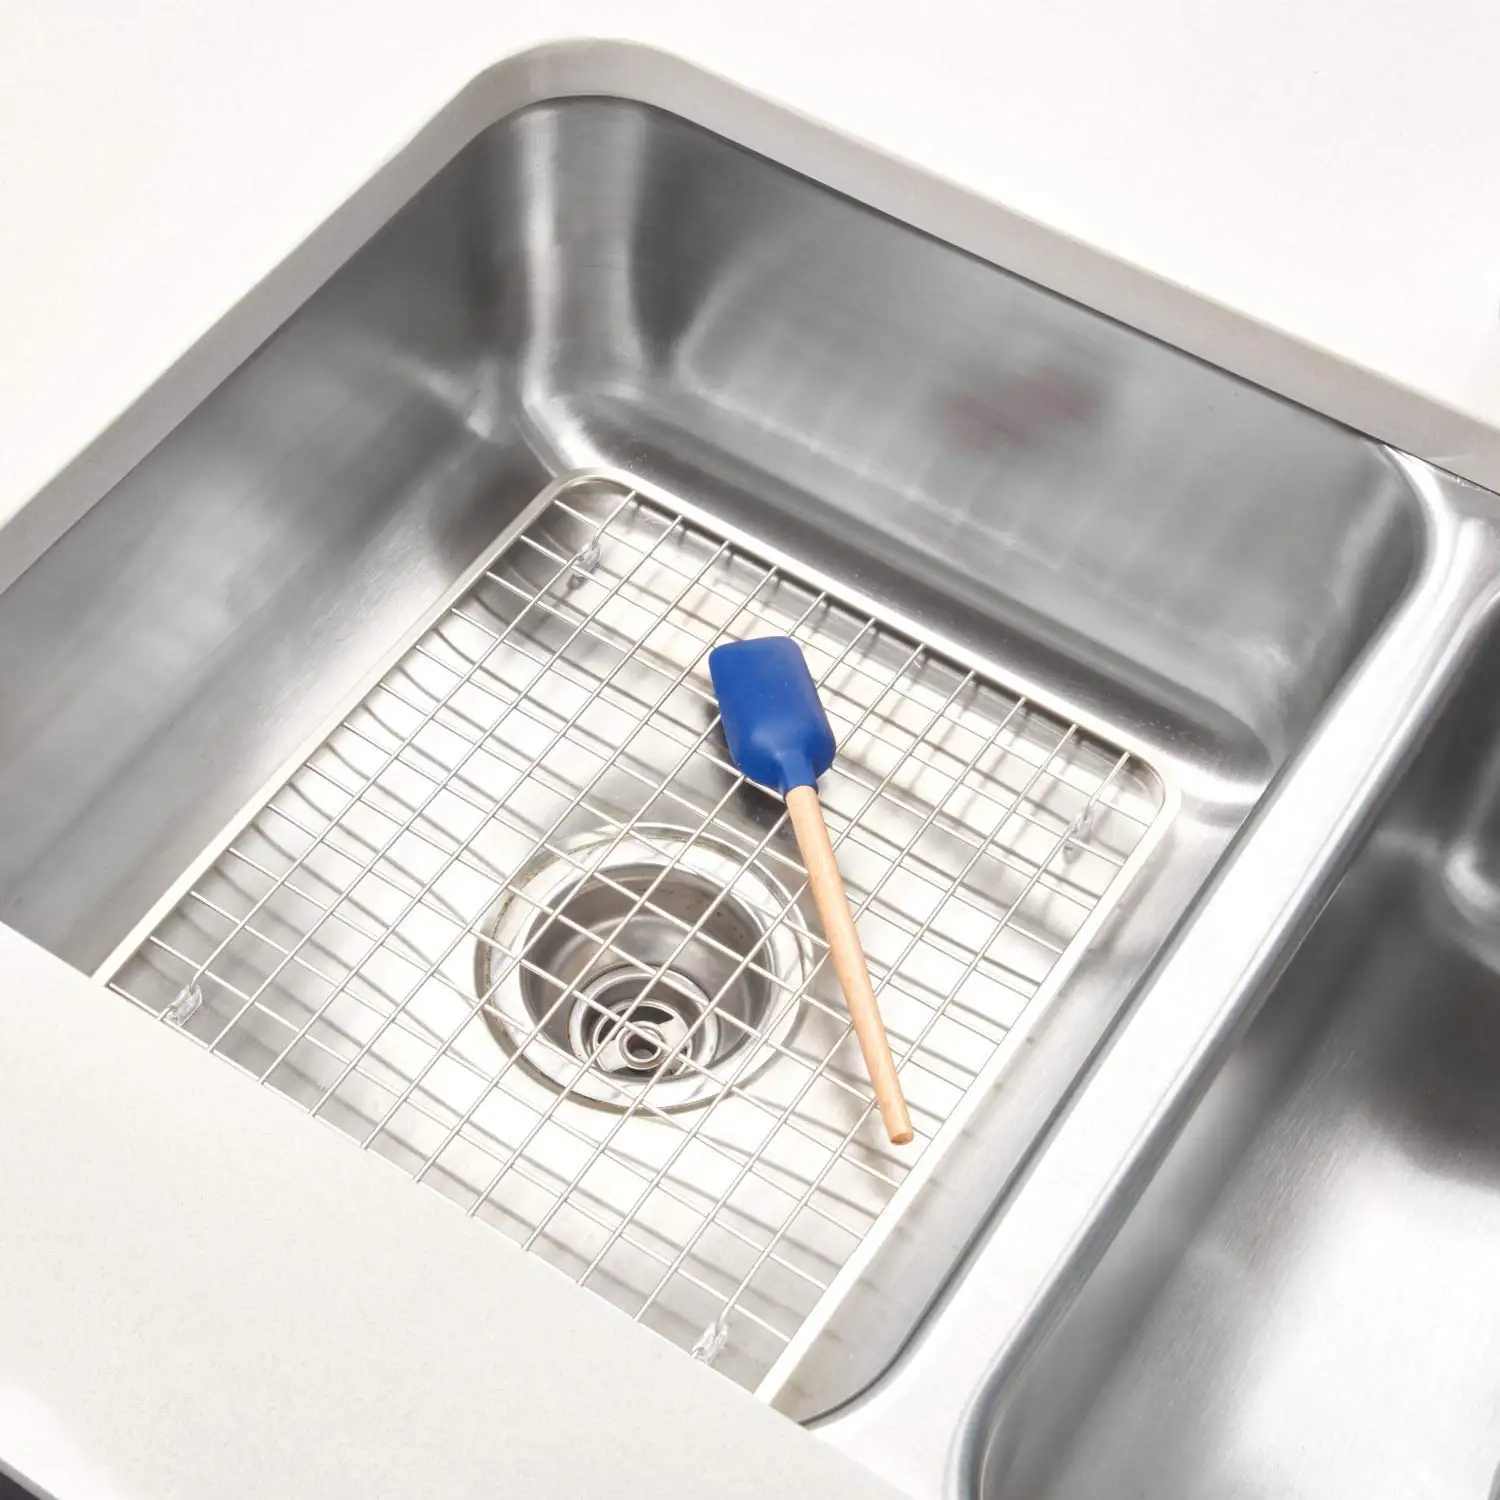 Manufacturer Kitchen Sink Protector Rack Wire Grid Mat With Center Drain Hole View Kitchen Sink Caizhu Product Details From Guangzhou Caizhu